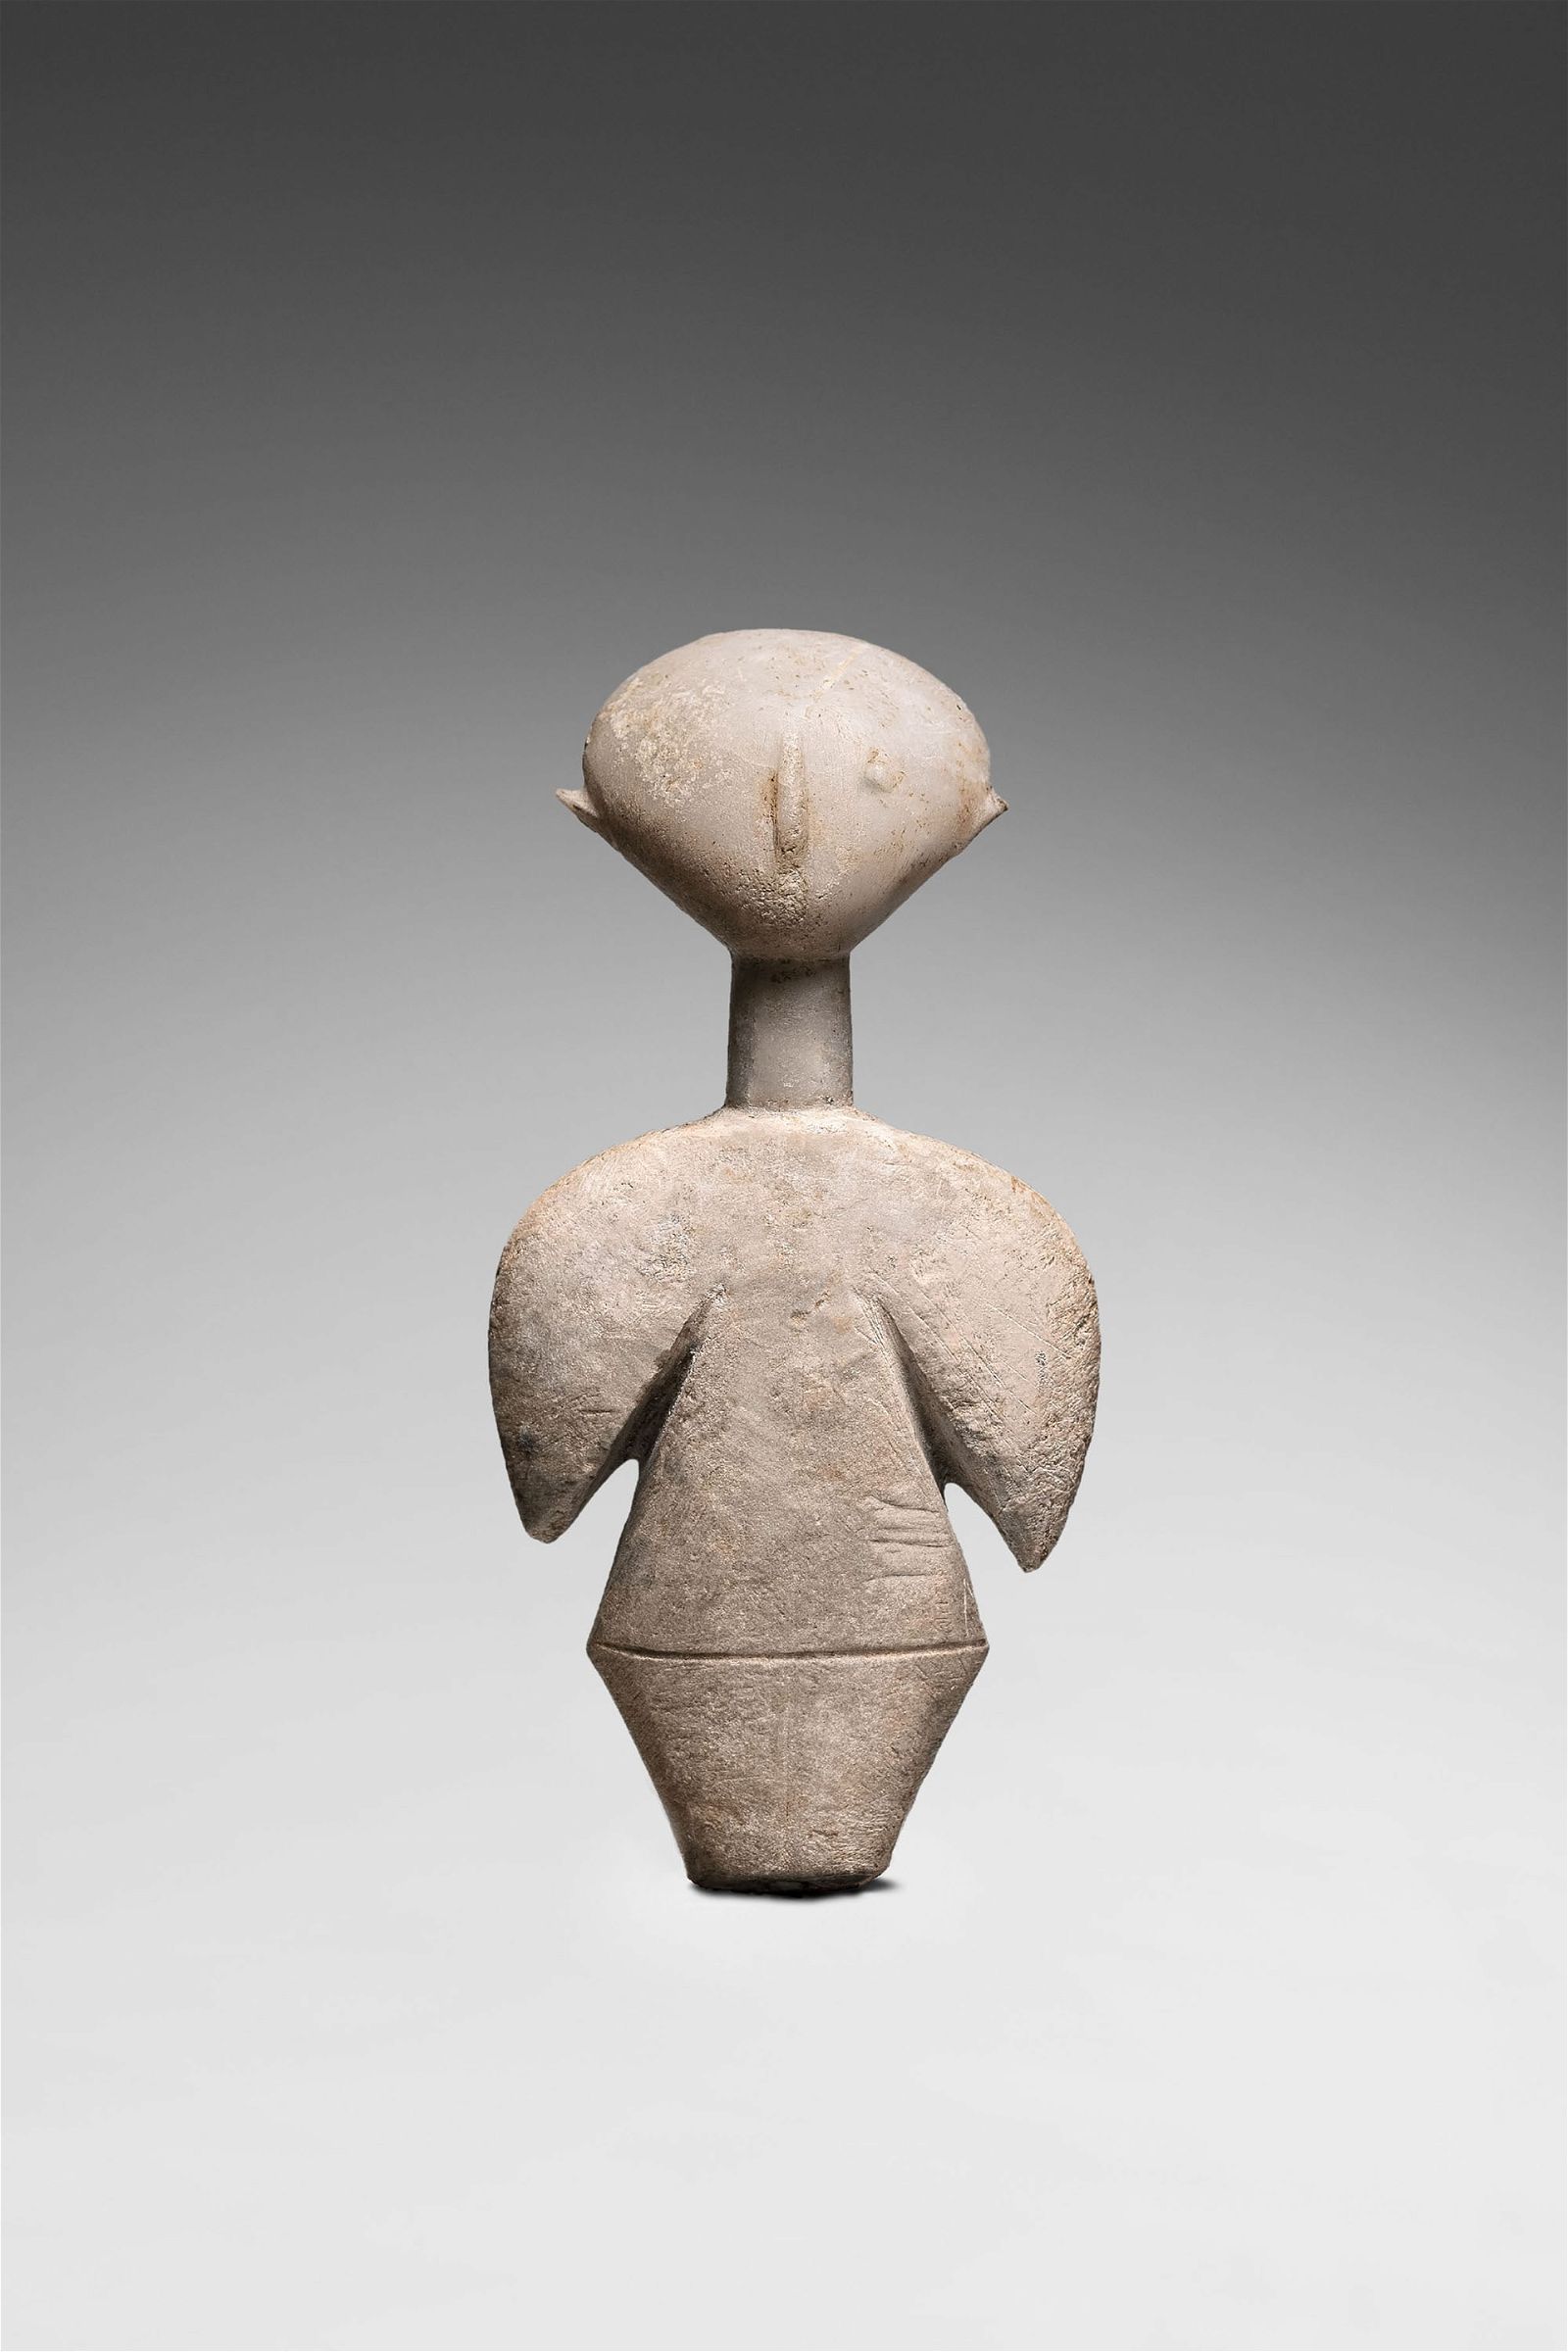 Kilia-type ‘stargazer’ figure dating to circa 4500–3500 BC, which hammered for €155,000 and sold for €201,500 ($216,940) with buyer’s premium at Native auctions in Brussels.